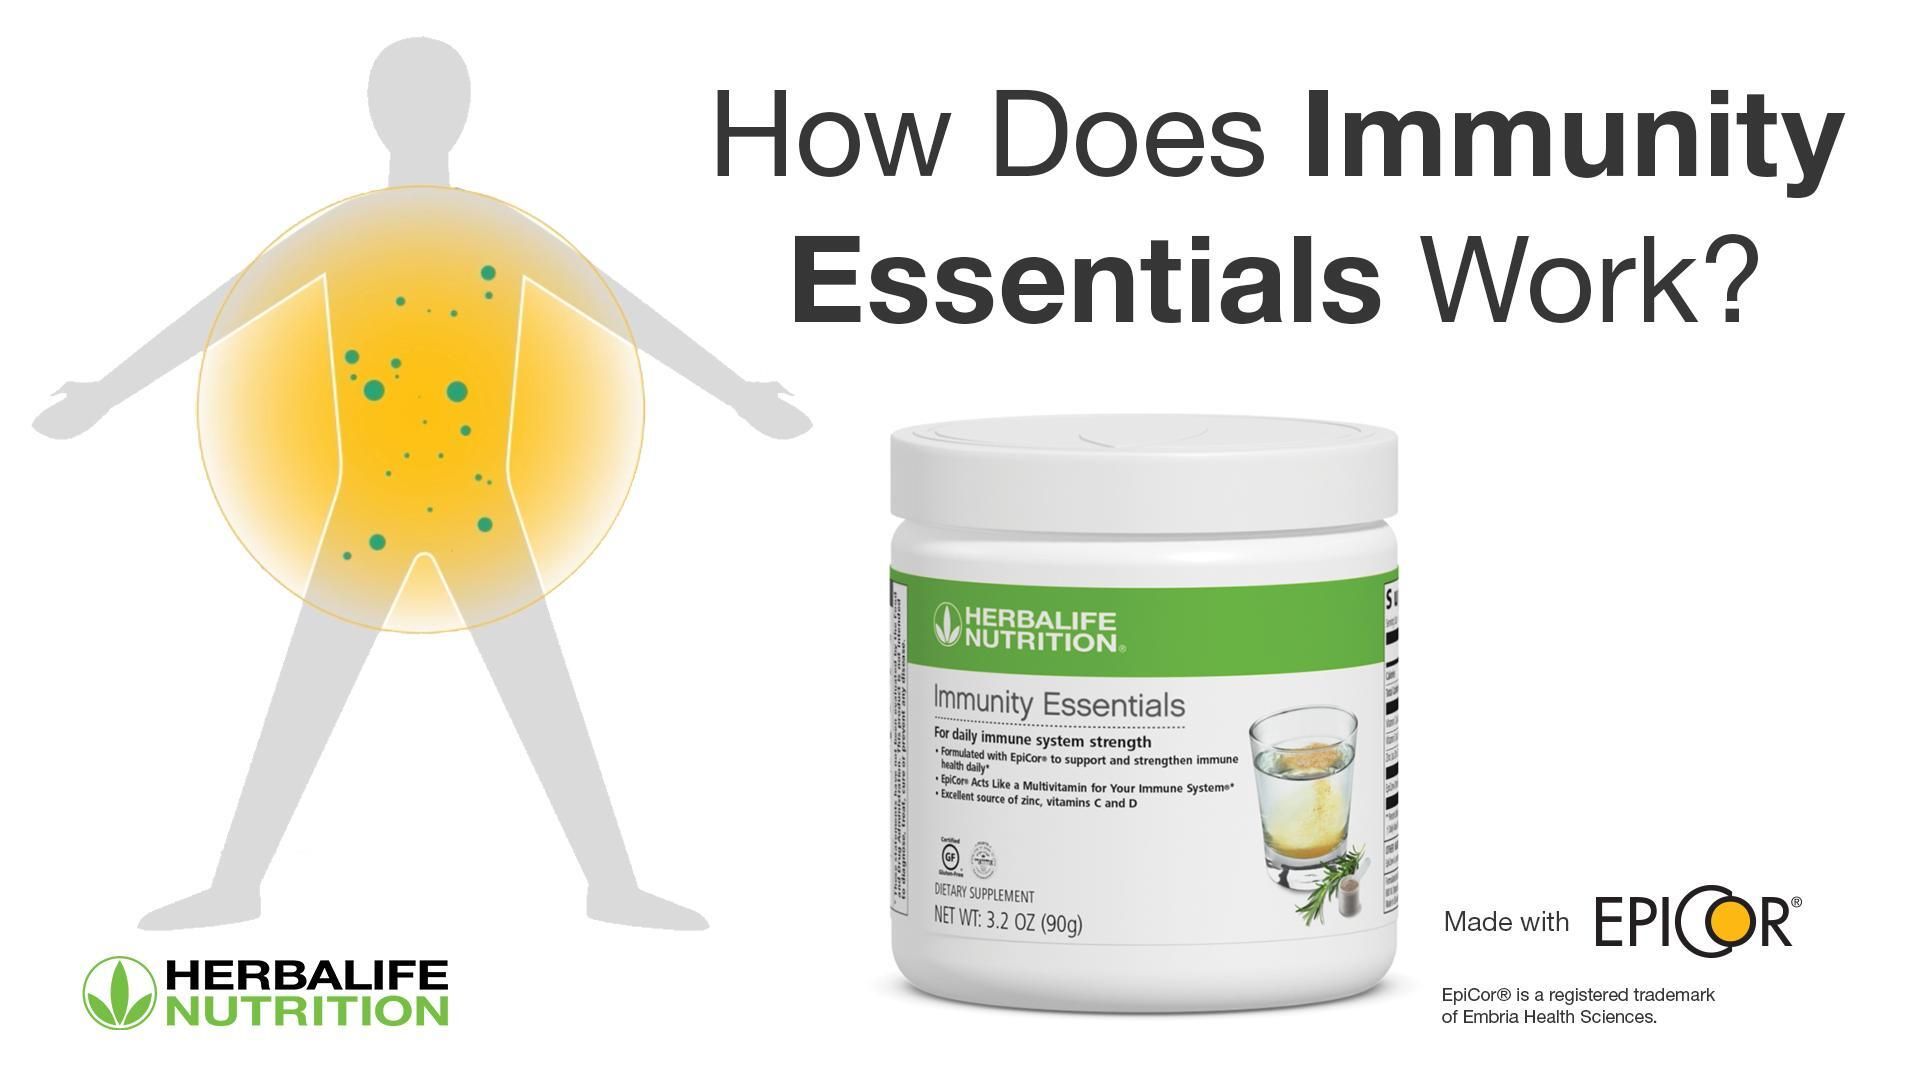 How Does Immunity Essentials Work?